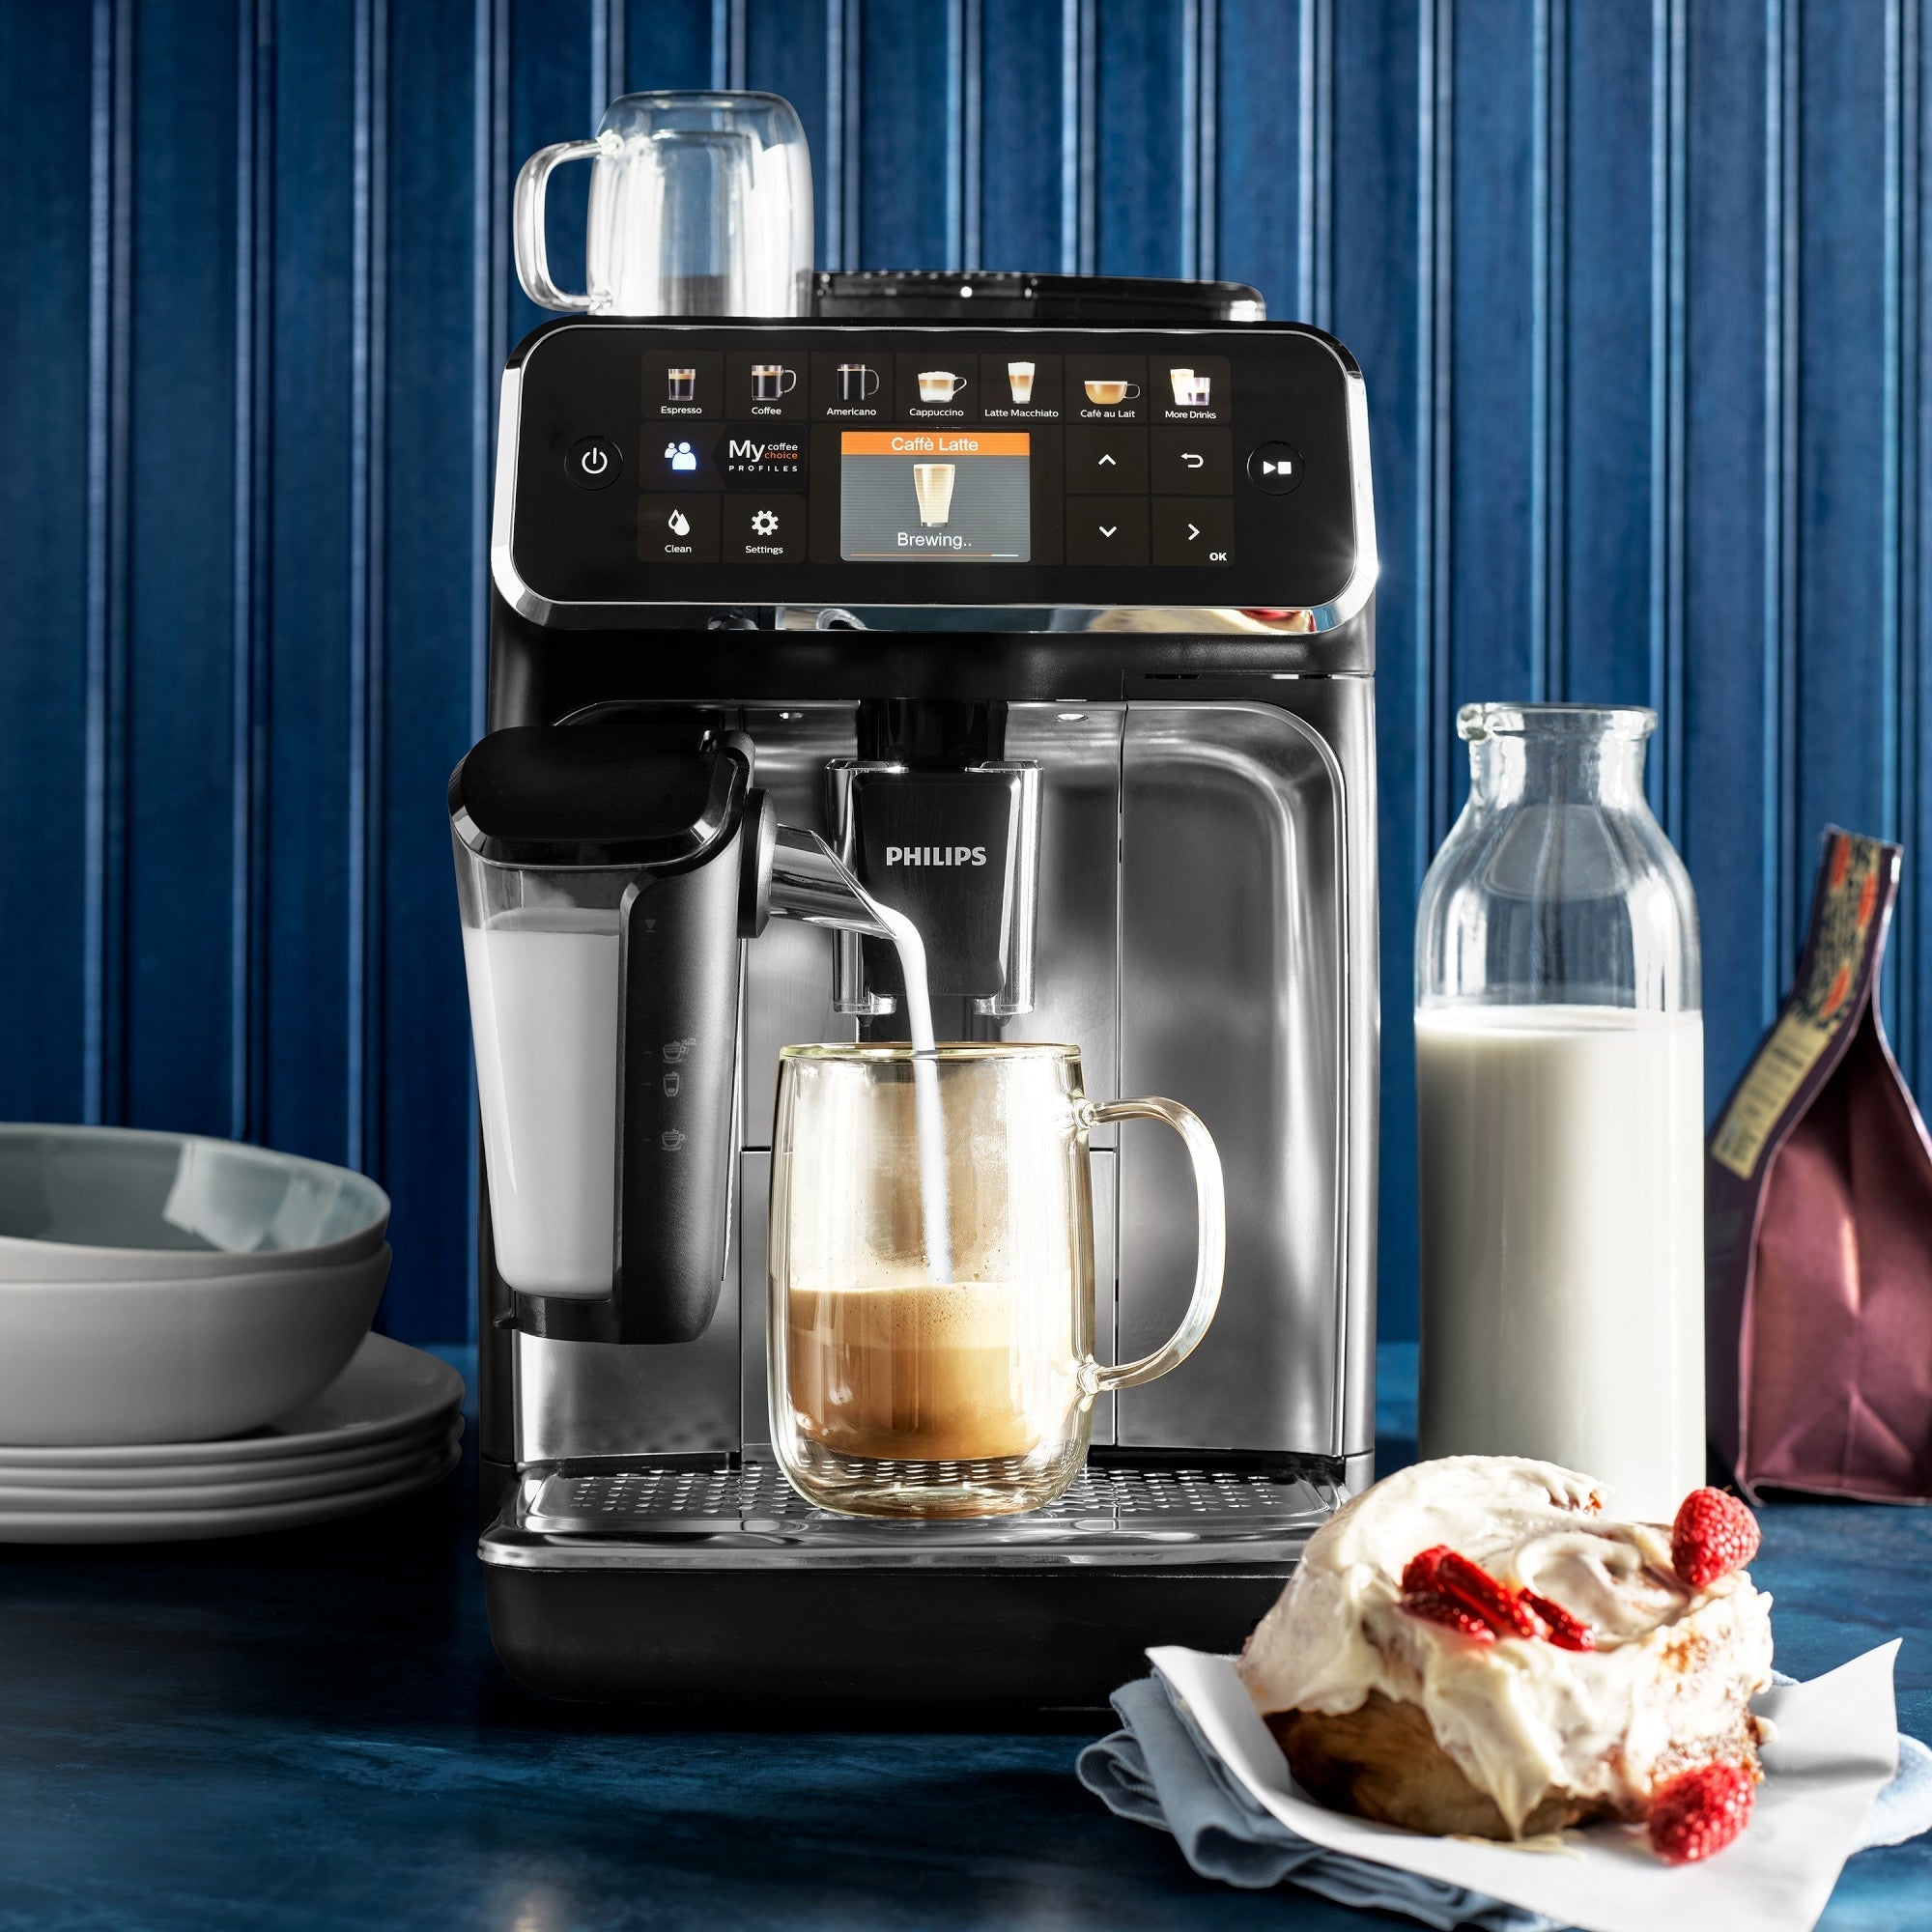 PHILIPS 5400 Series Fully Automatic Espresso & LatteGo Machine [LIMITED SALE]